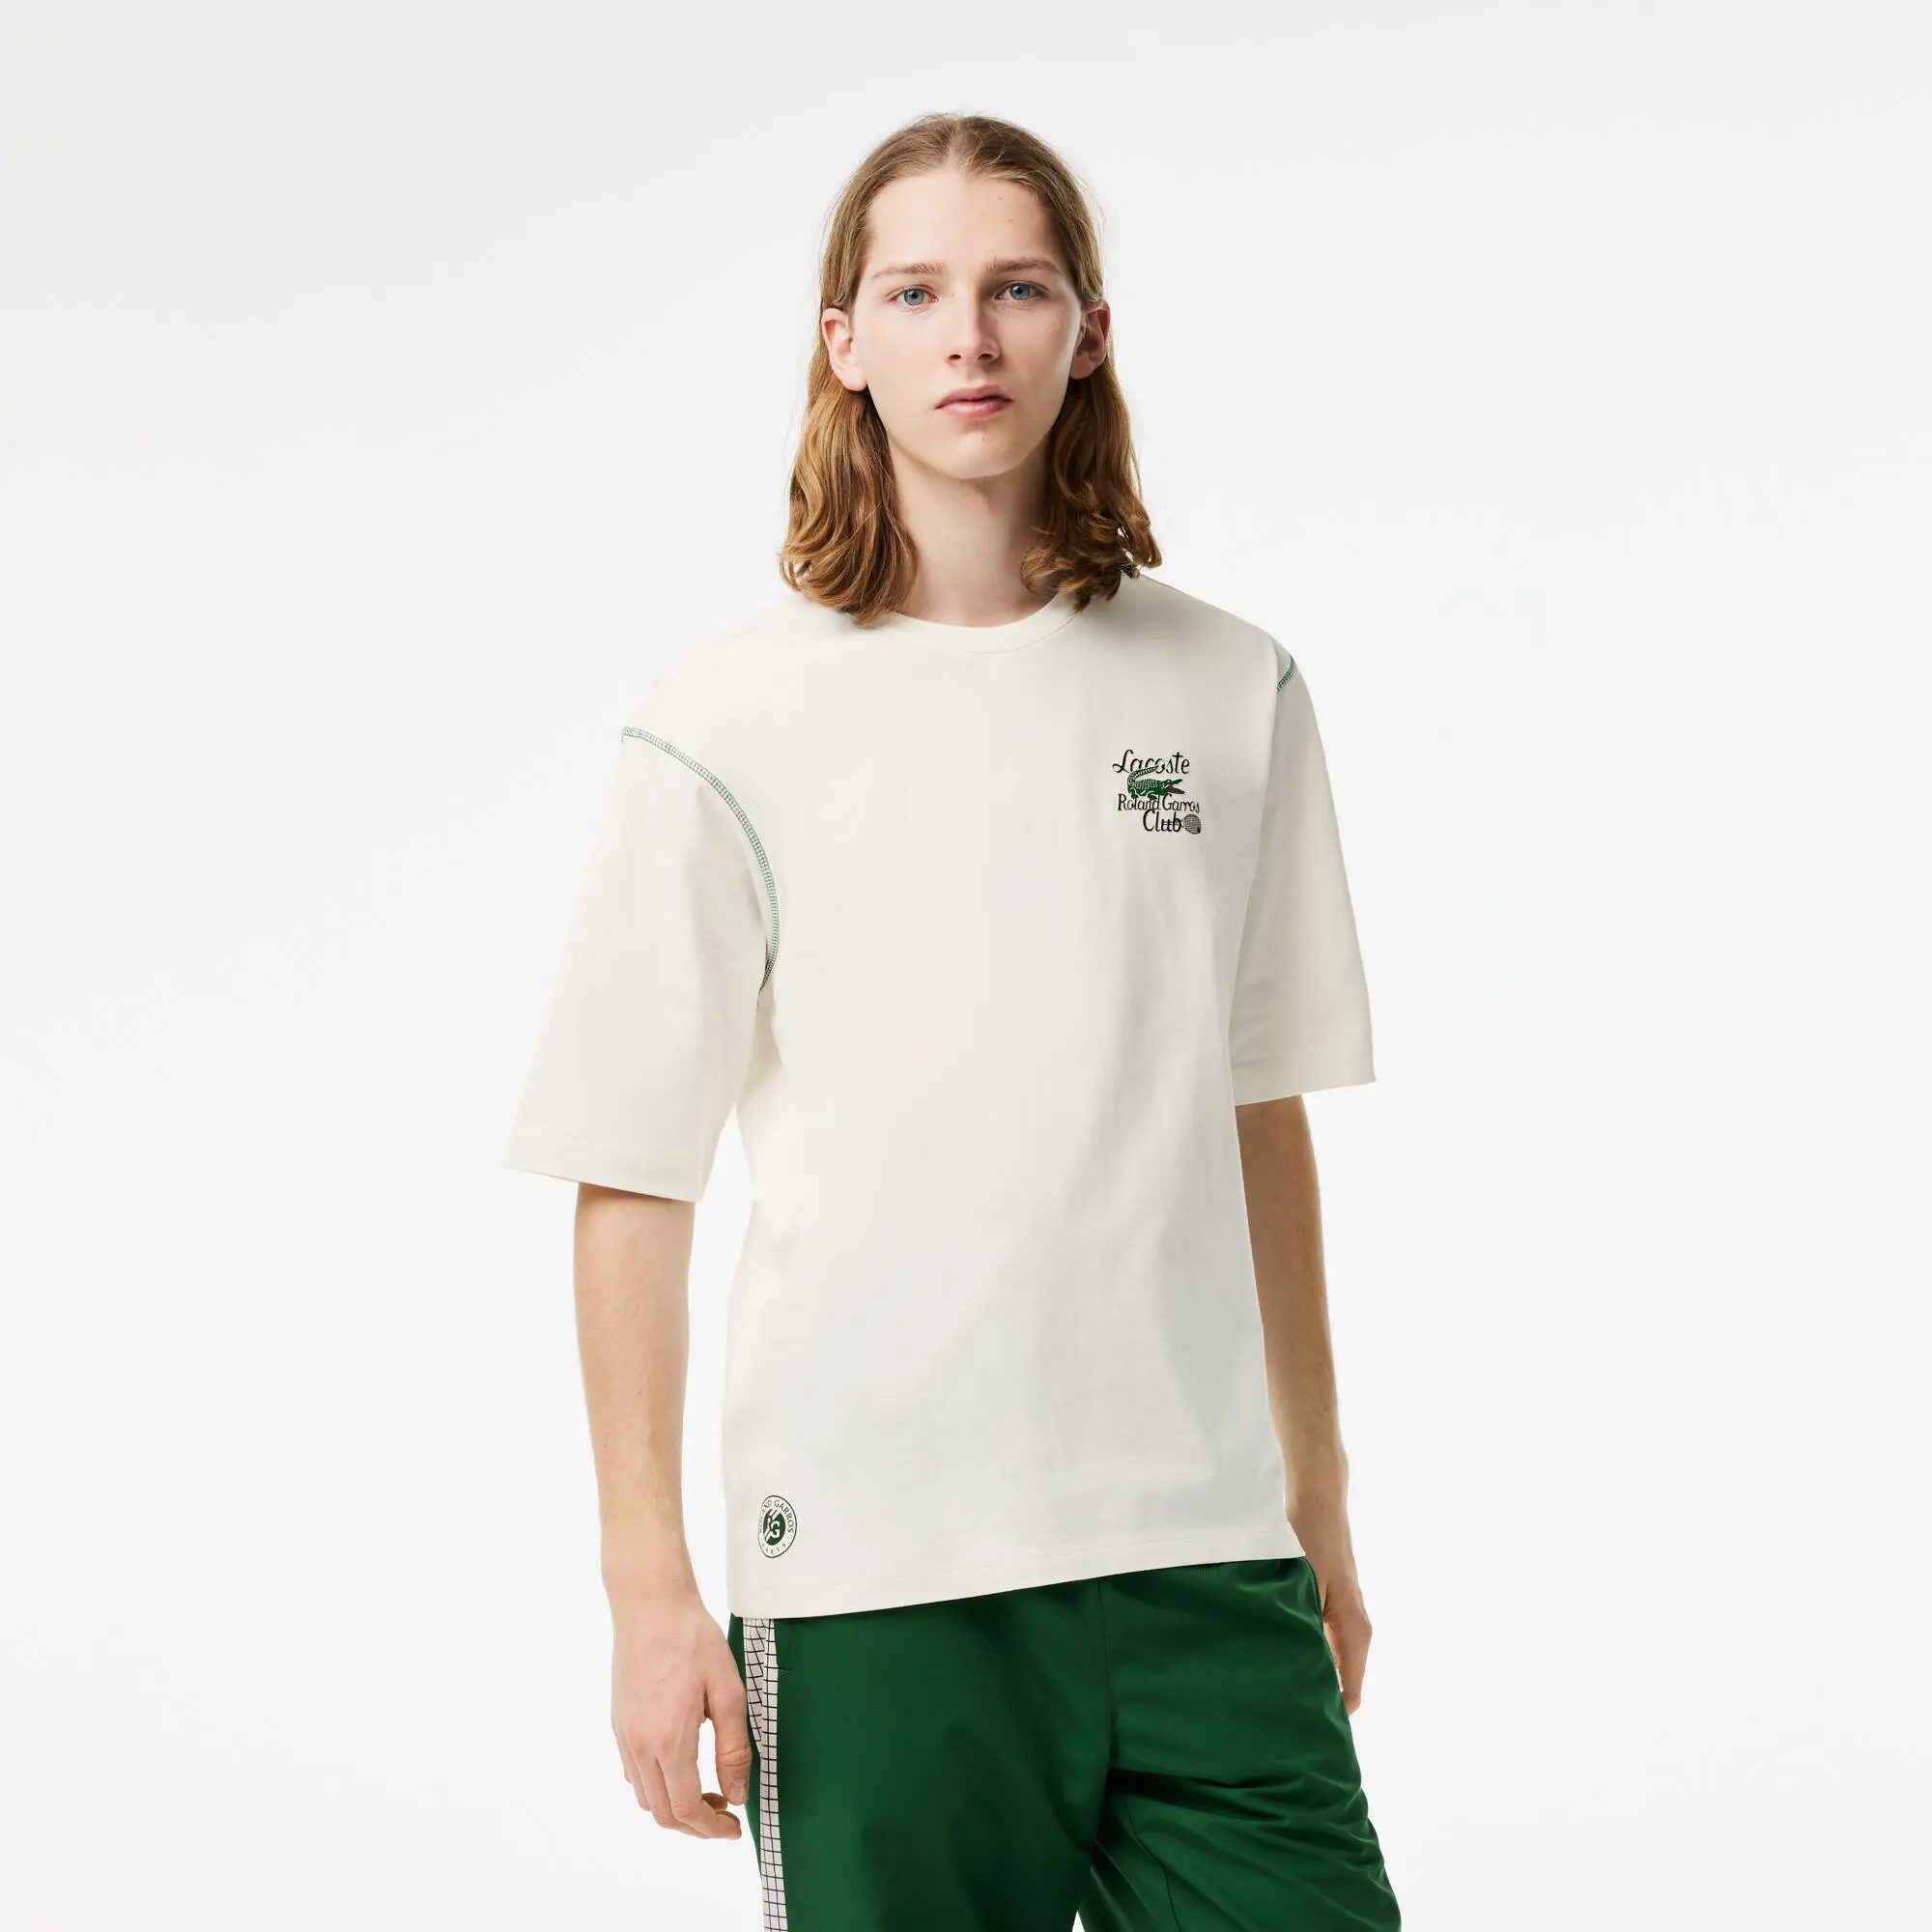 Lacoste Men’s Lacoste Sport Roland Garros Edition Chunky Jersey T-Shirt. 1